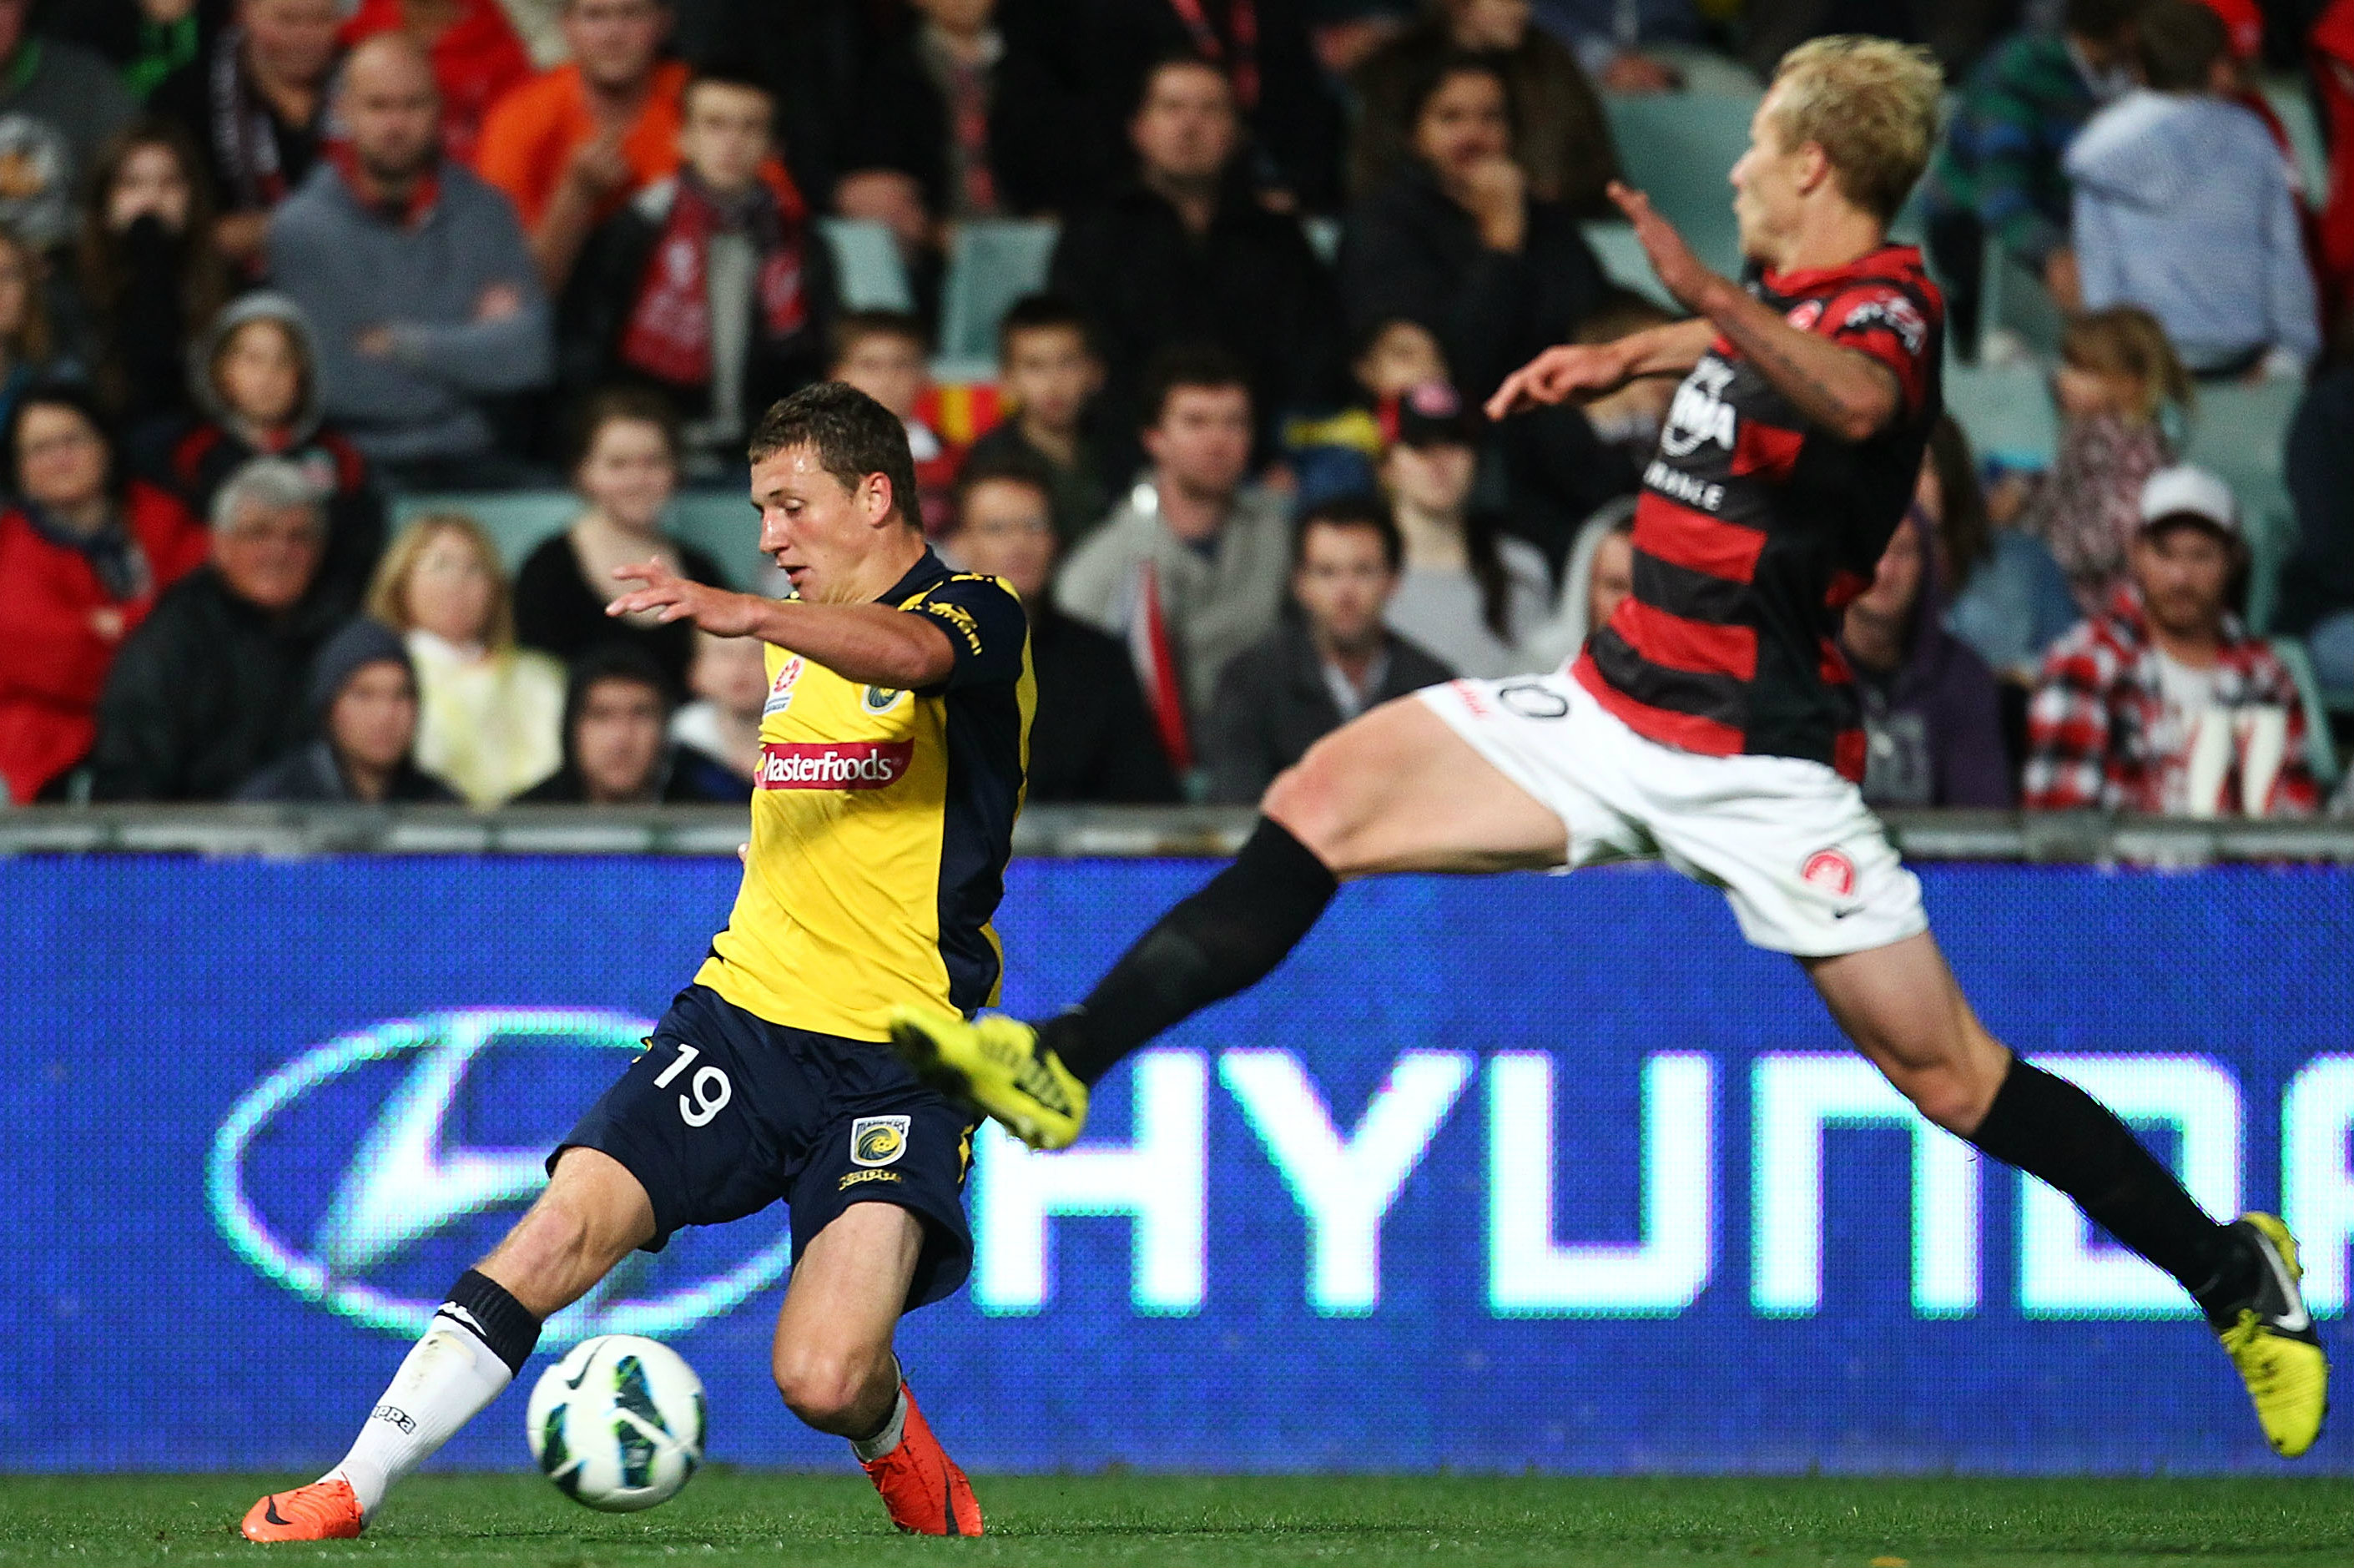 Mitchell Duke, playing for the Mariners, in the first-ever Wanderers game at Parramatta Stadium in 2012